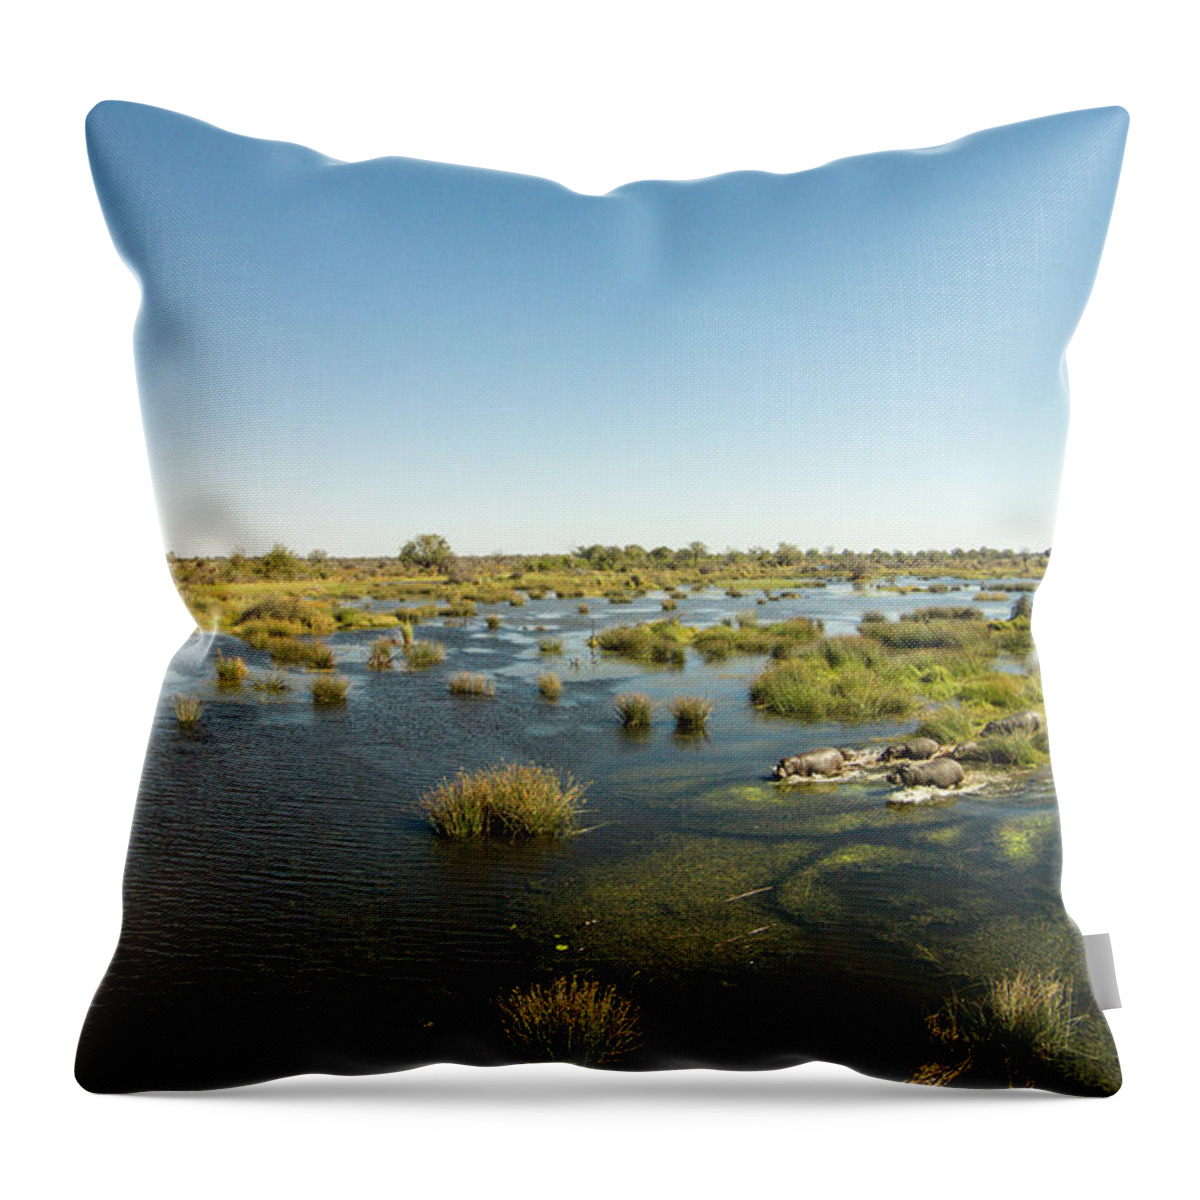 Aerial Throw Pillow featuring the photograph Aerial View Of Hippopotamus, Moremi by WorldFoto